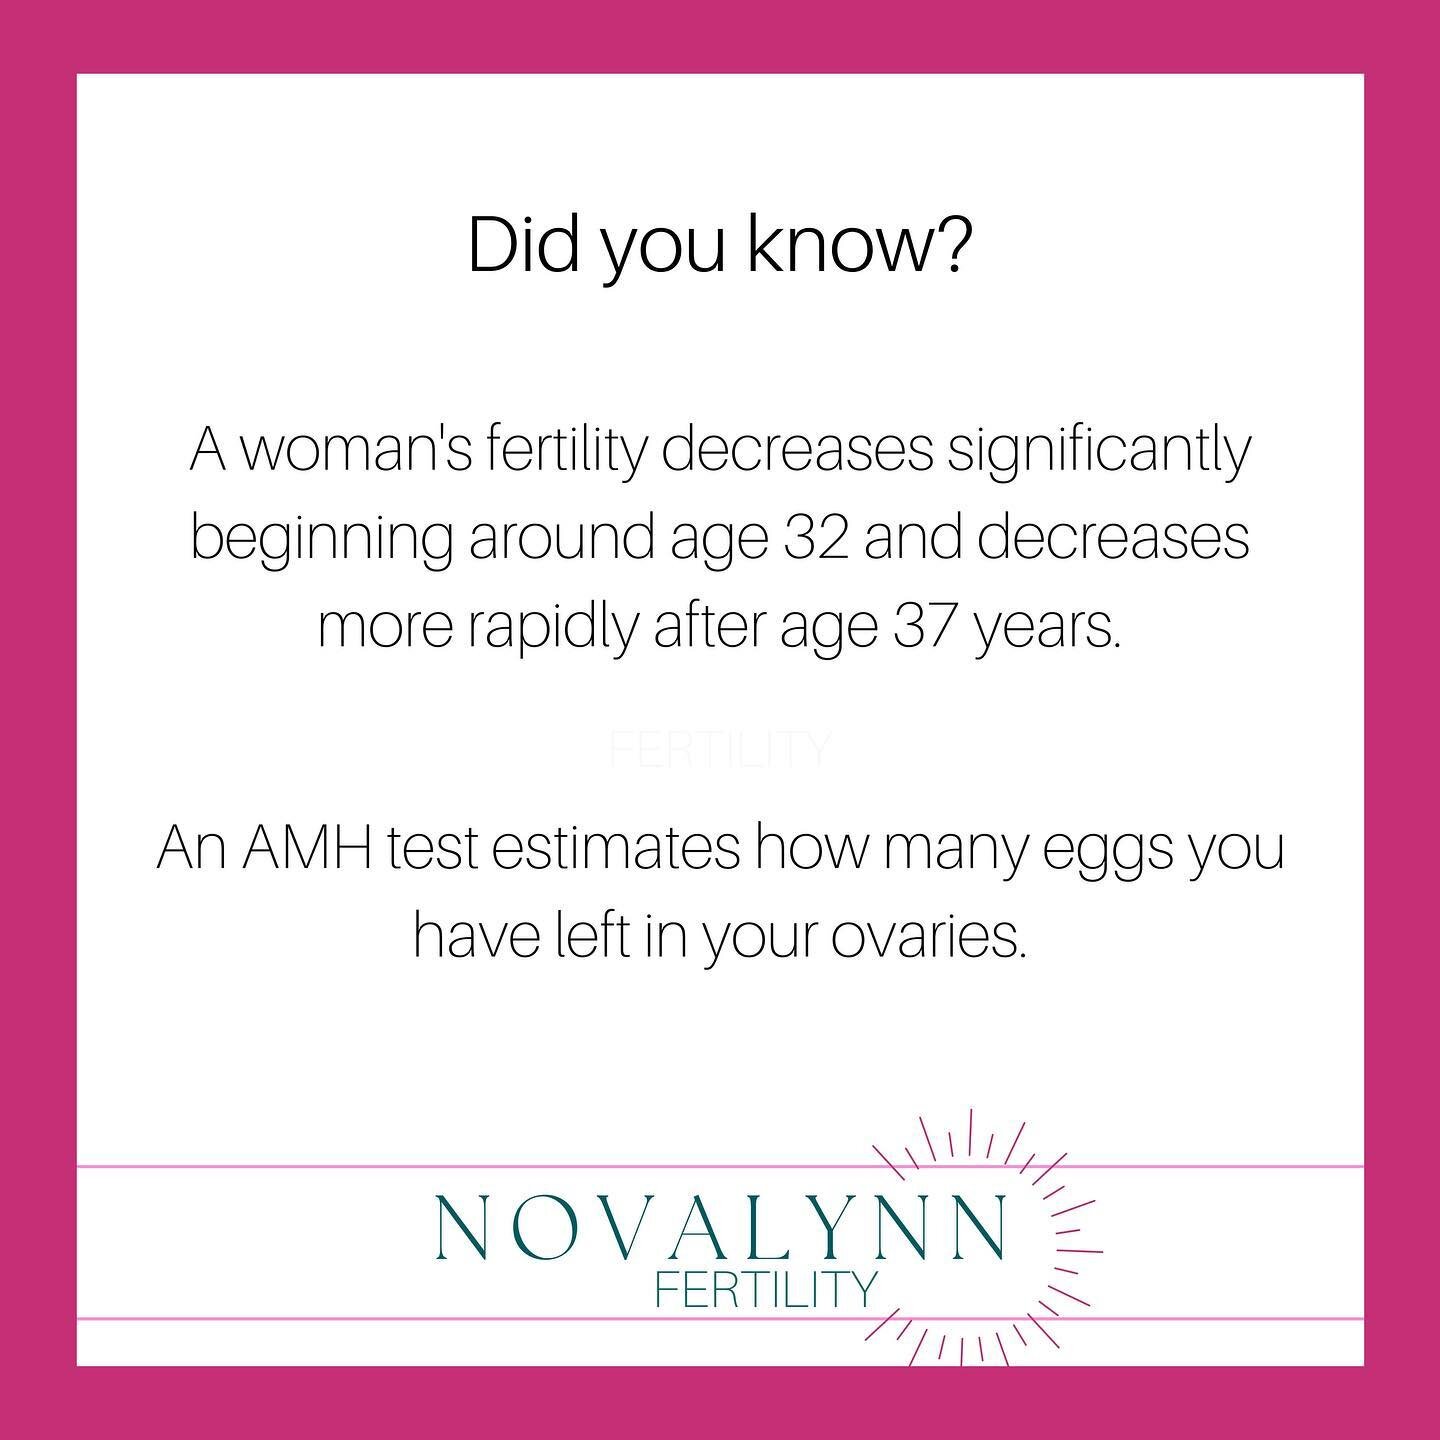 The American College of Obstetricians and Gynecologists says a woman's fertility decreases significantly beginning around age 32 and decreases more rapidly after age 37. Education and enhanced awareness of the effect of age on fertility are essential